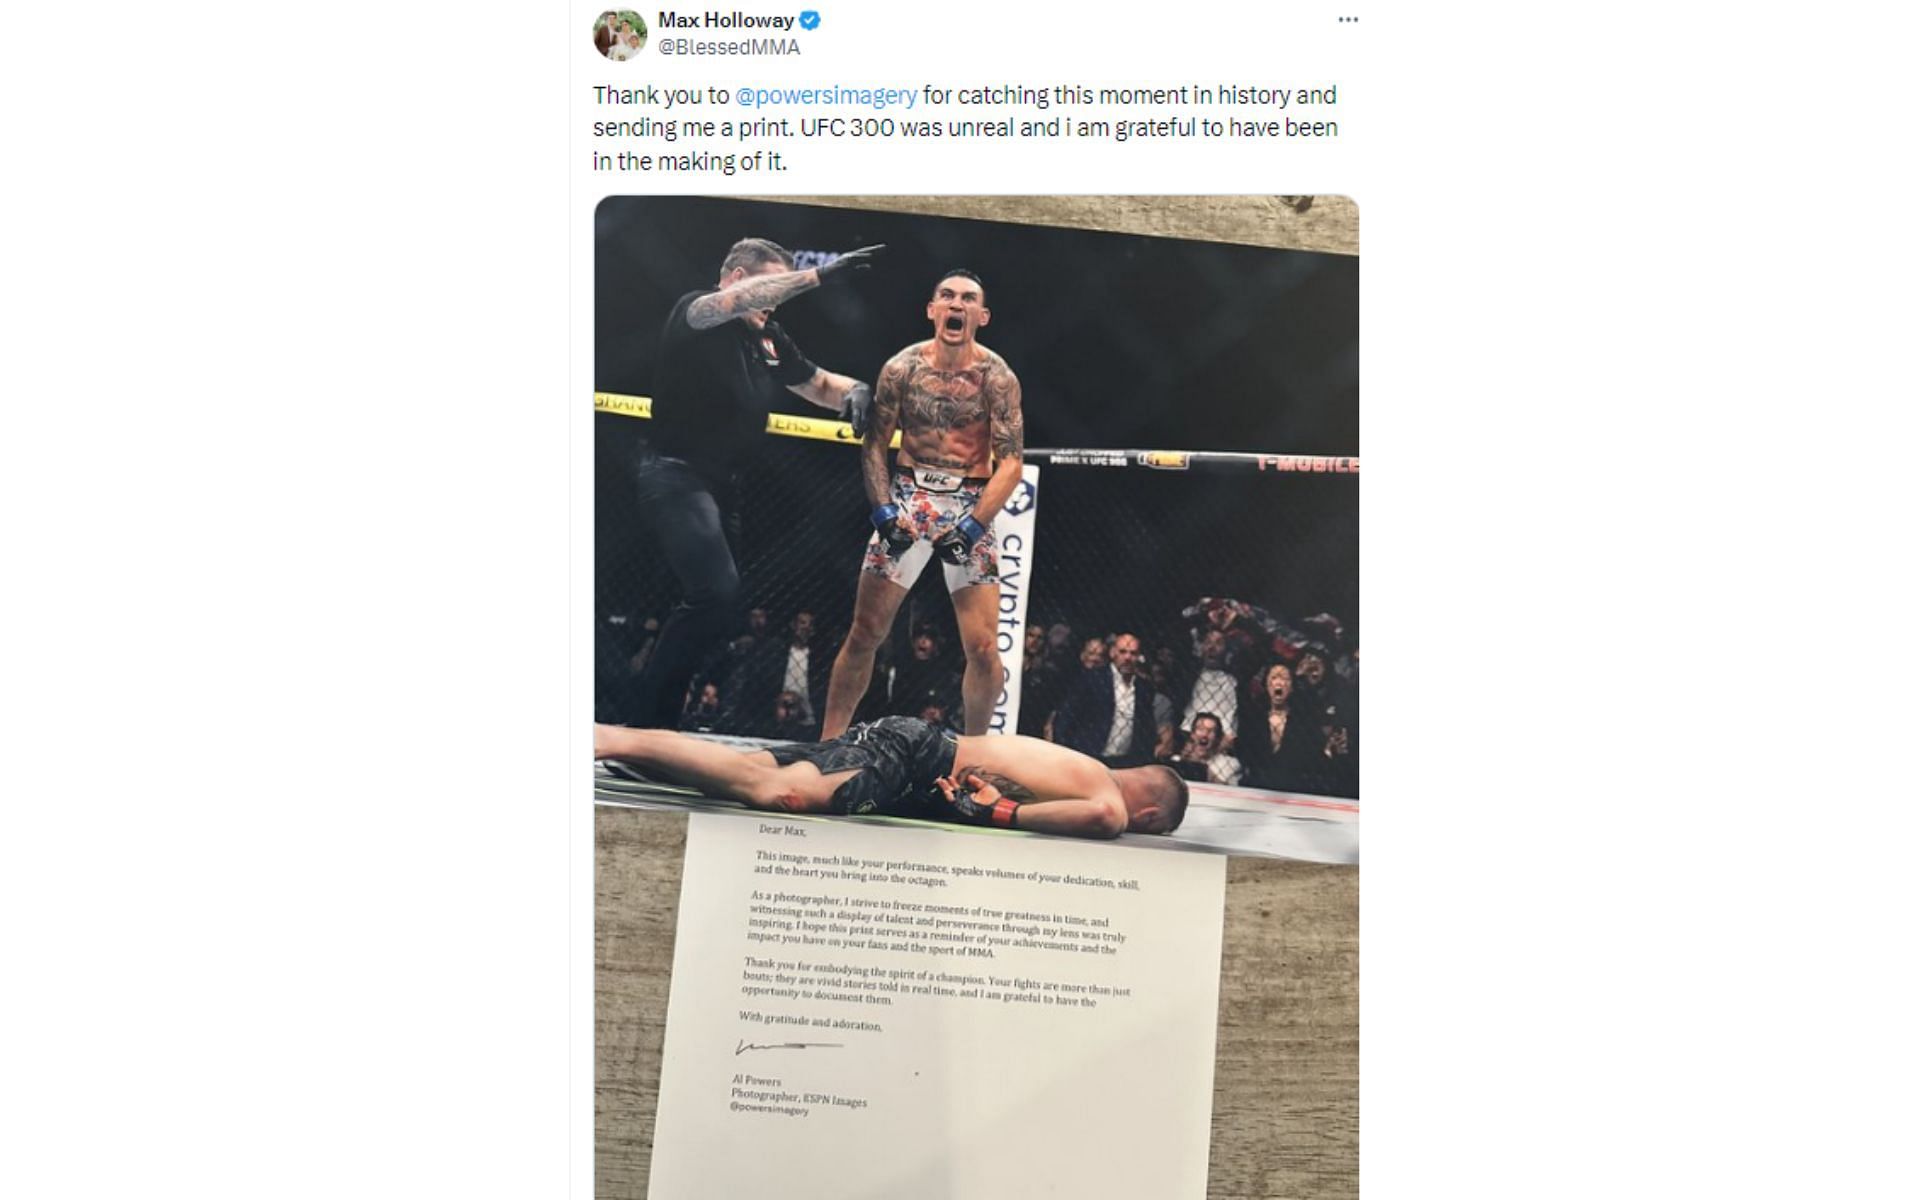 Holloway&#039;s tweet featuring the letter from Powers [Image courtesy: @BlessedMMA - X]